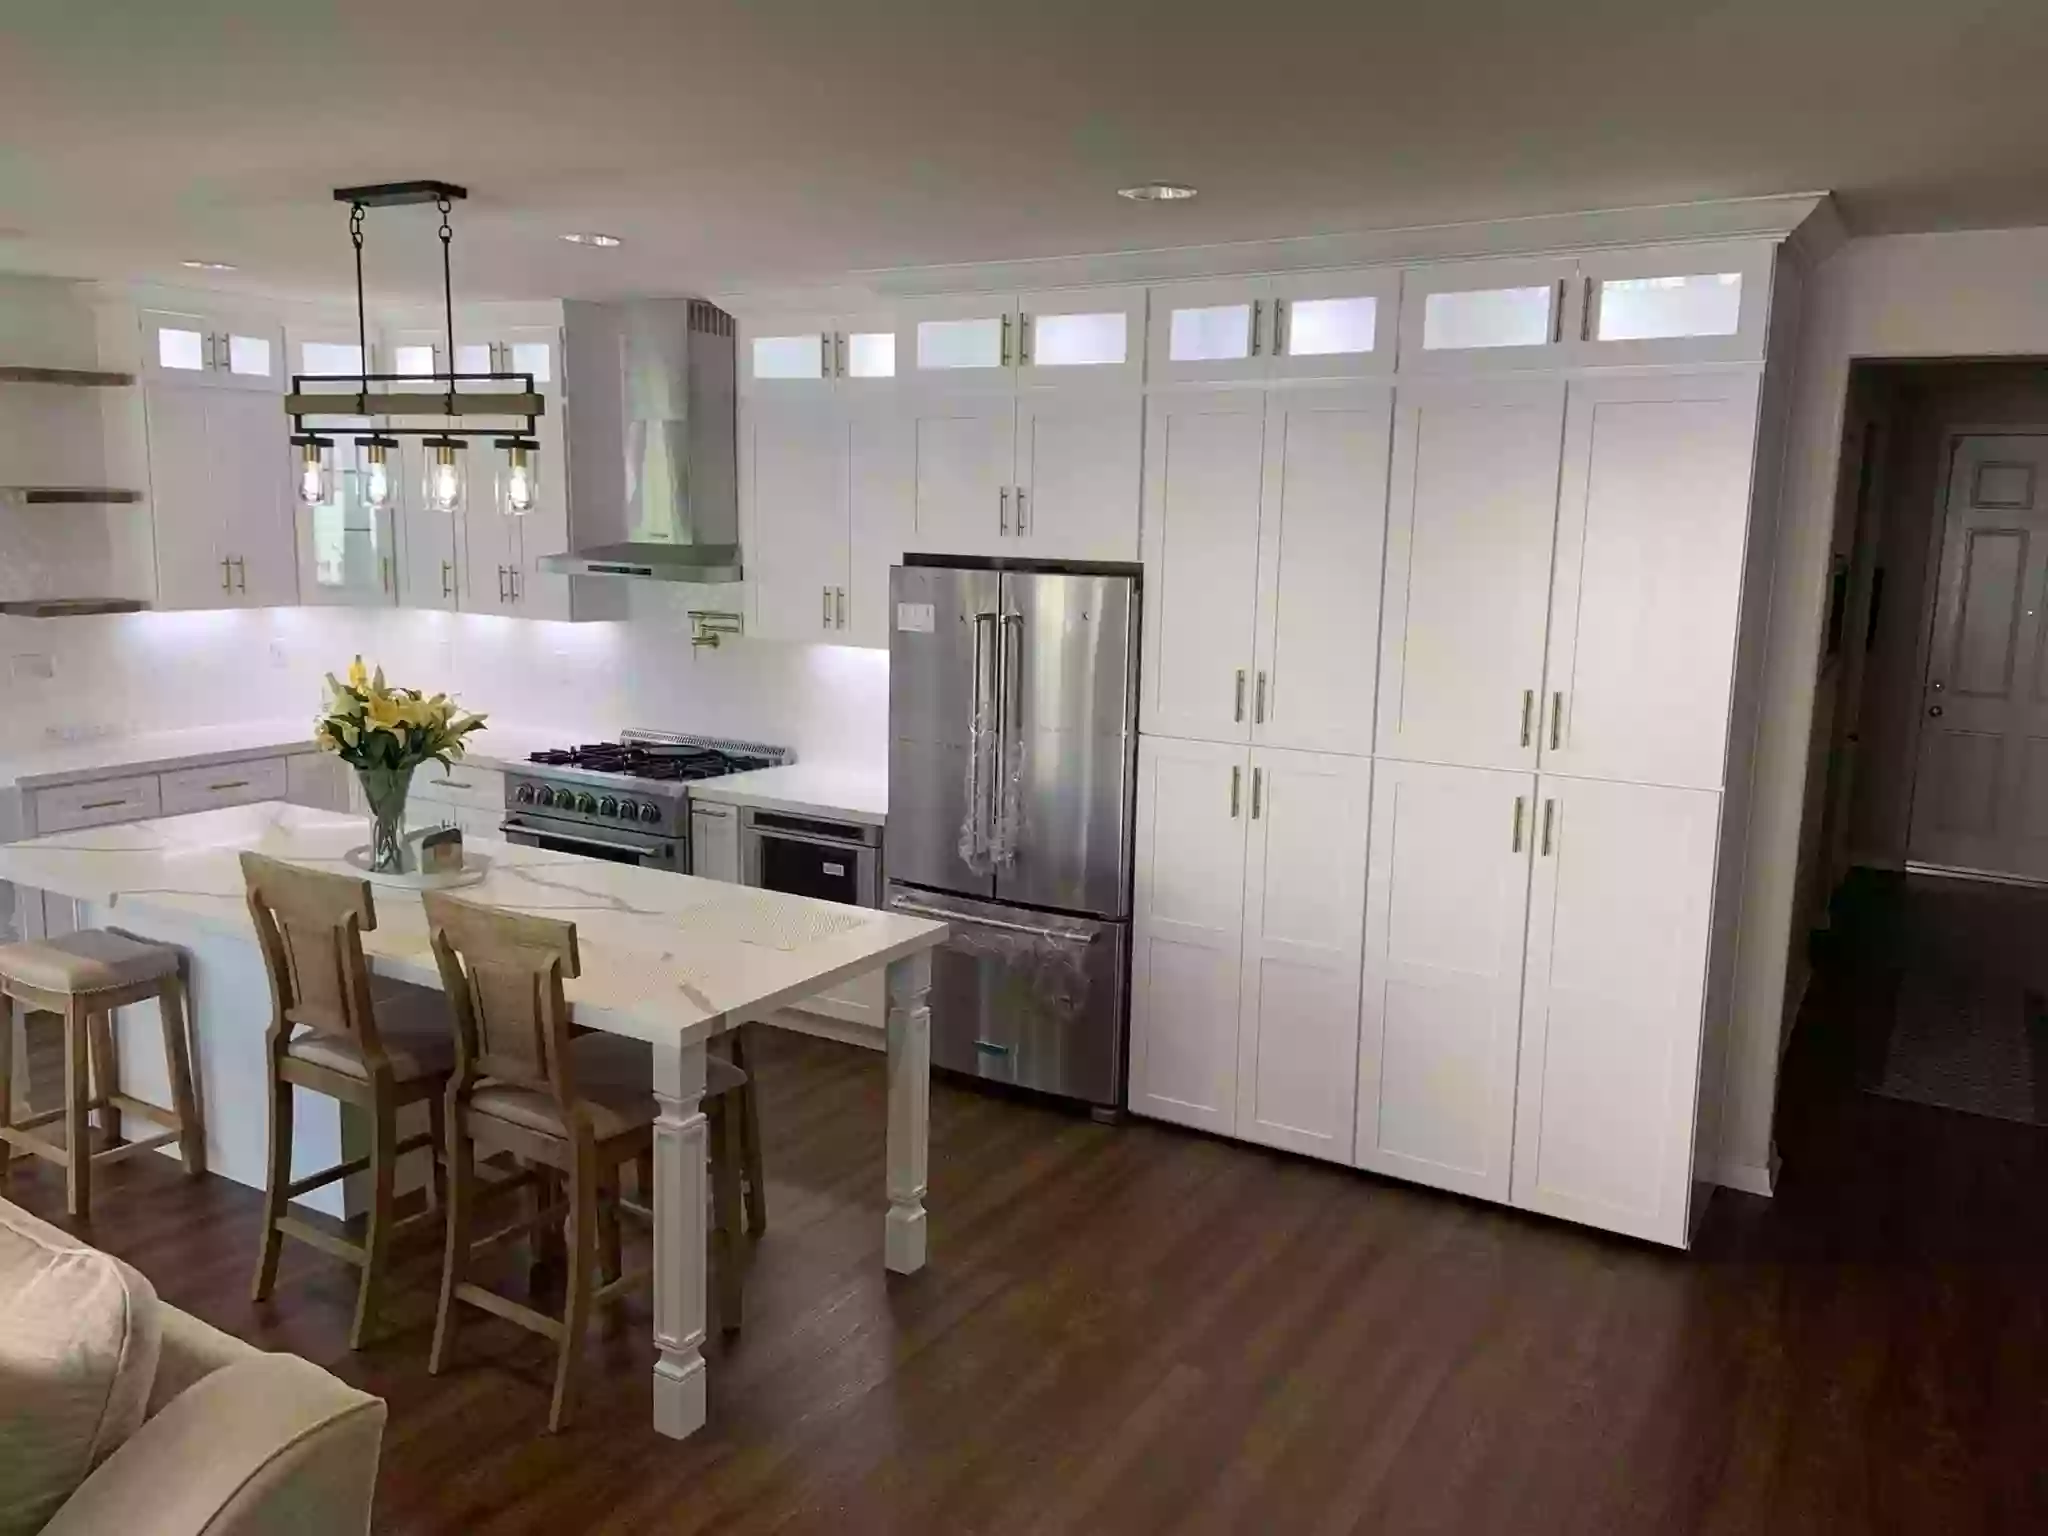 Exclusive Cabinets and Countertops